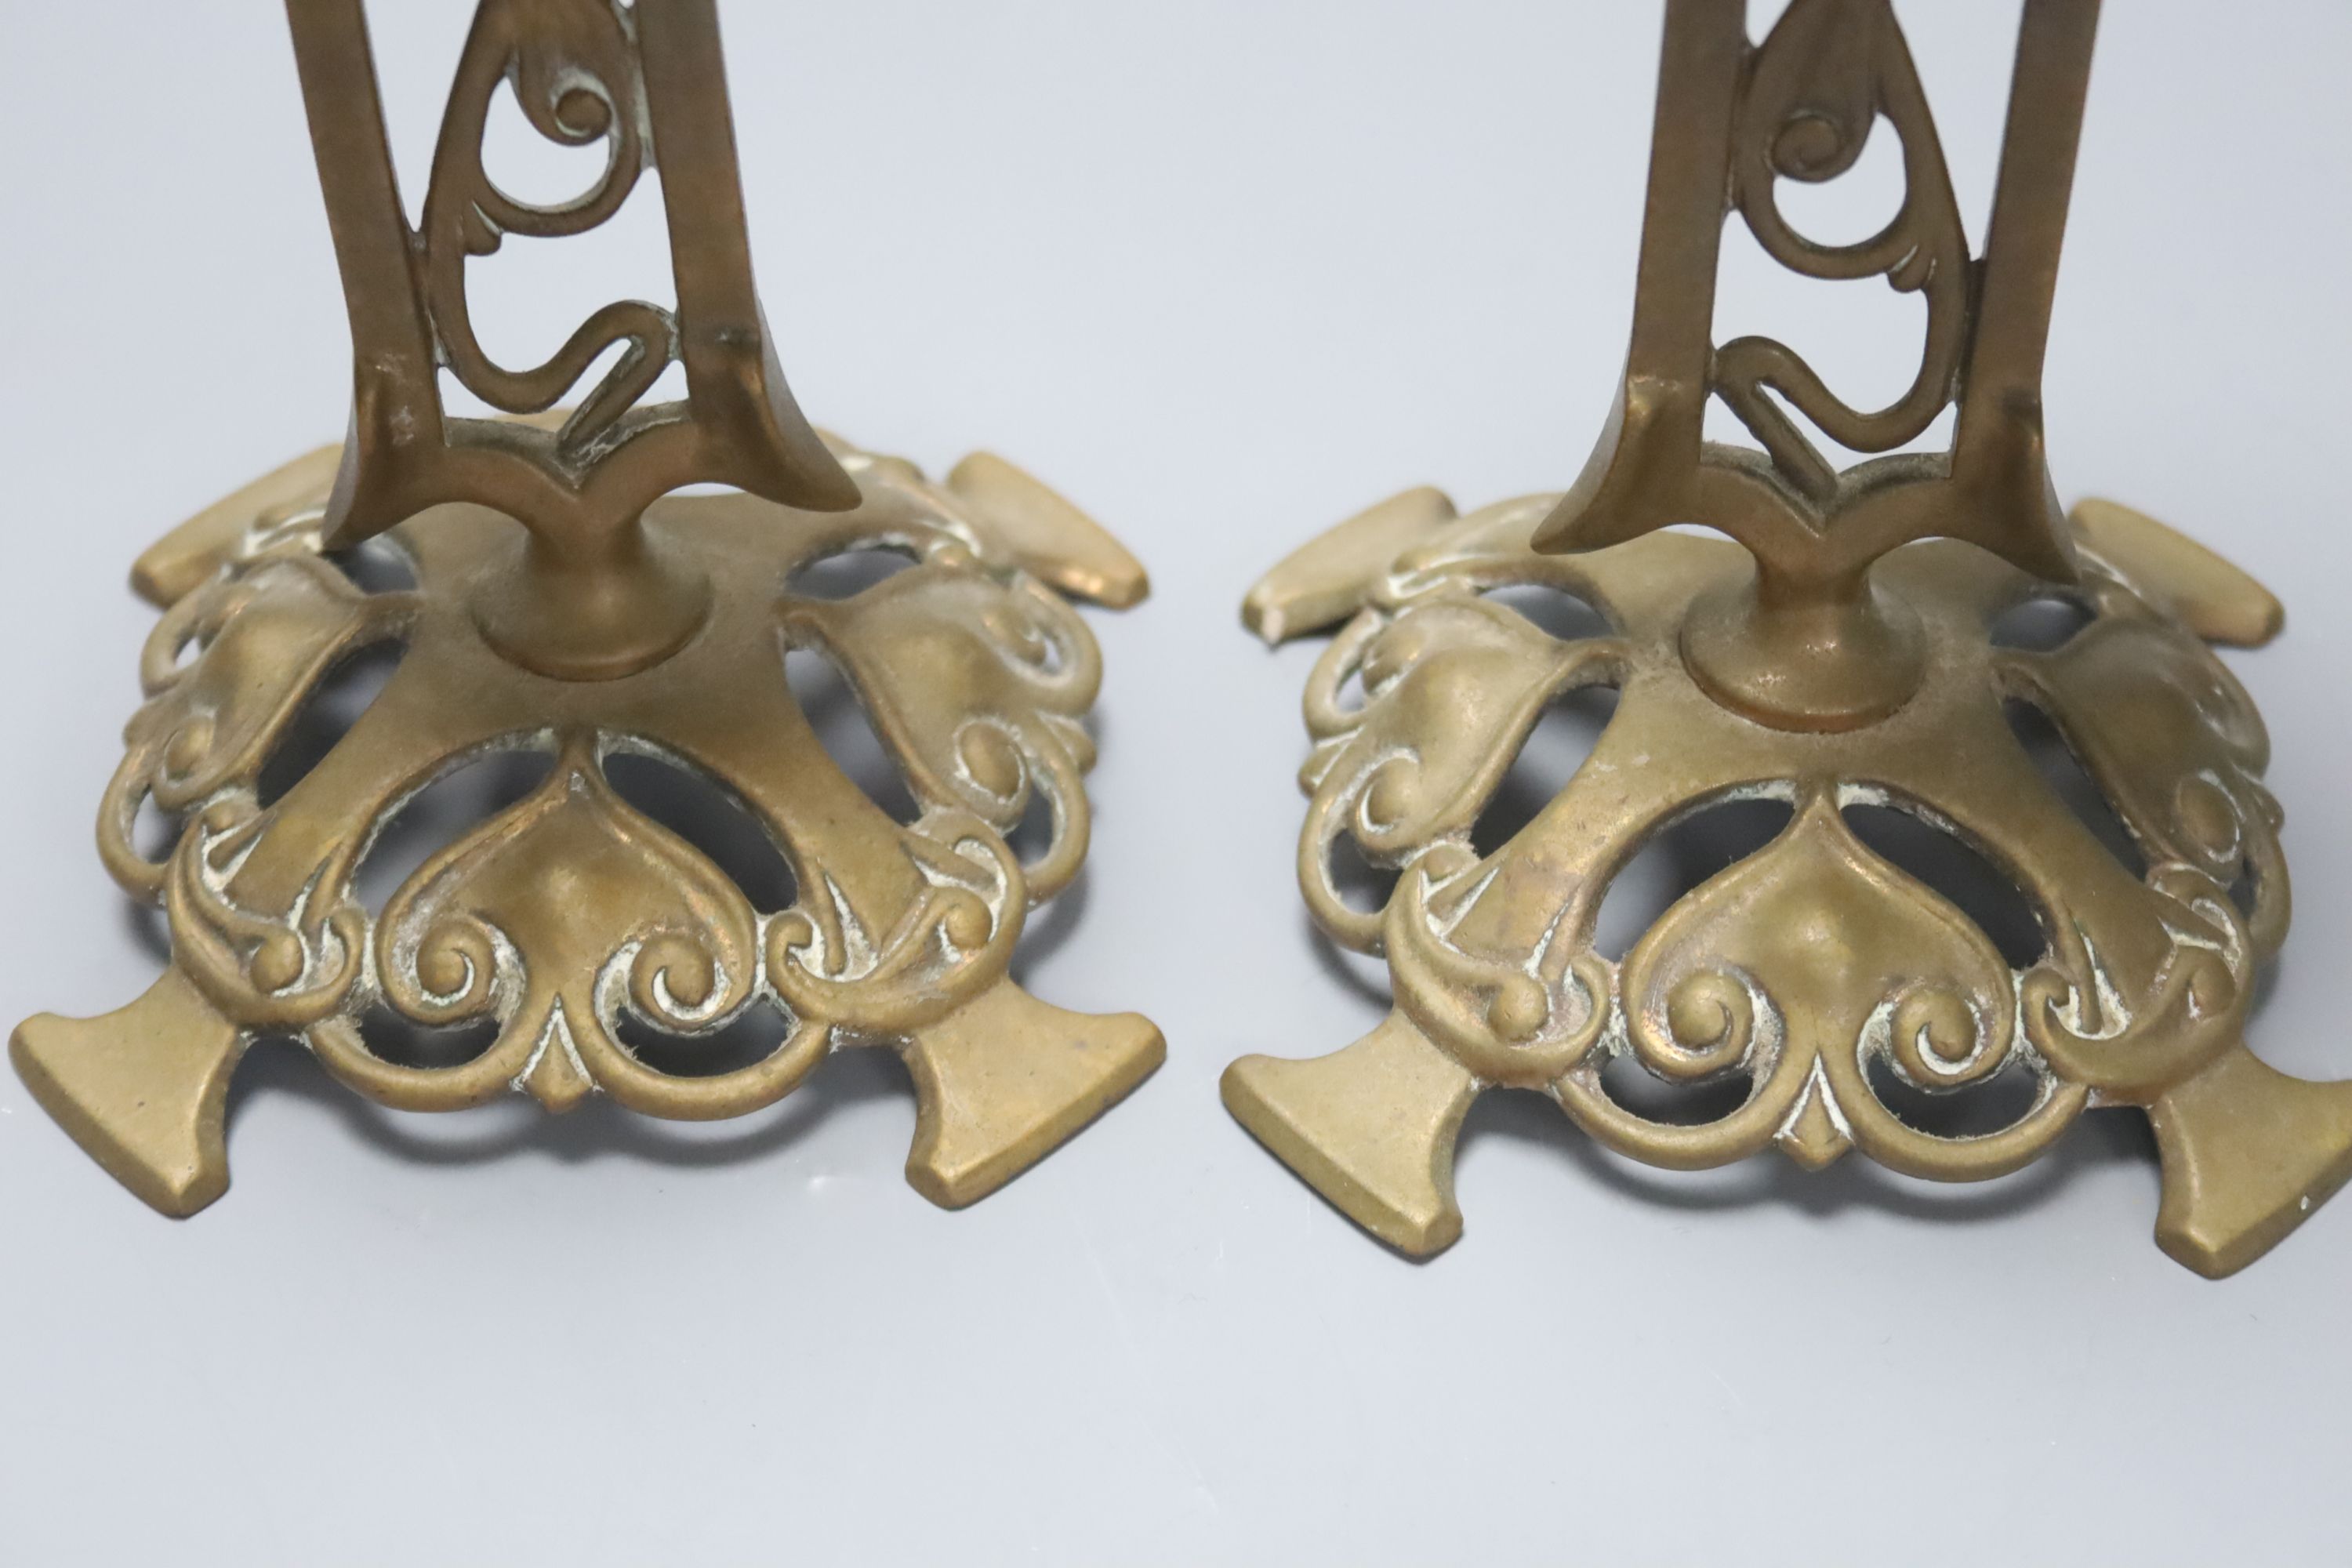 A pair of Art Nouveau candlesticks by William Tonks & Sons, height 18cm